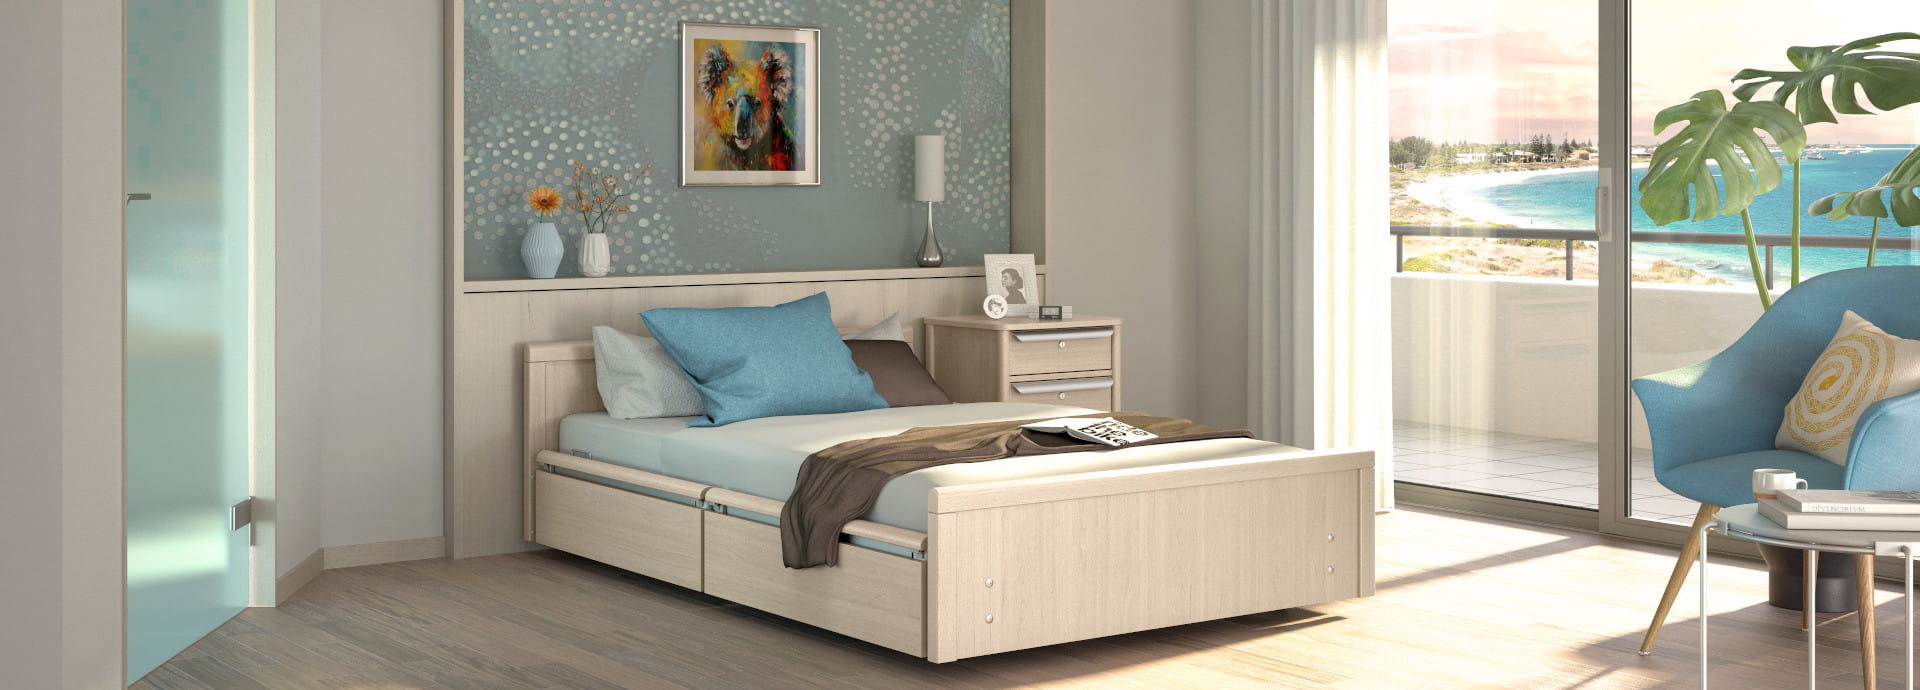 sentida sc-xxl - The heavy duty and comfort care bed for the most demanding care needs!